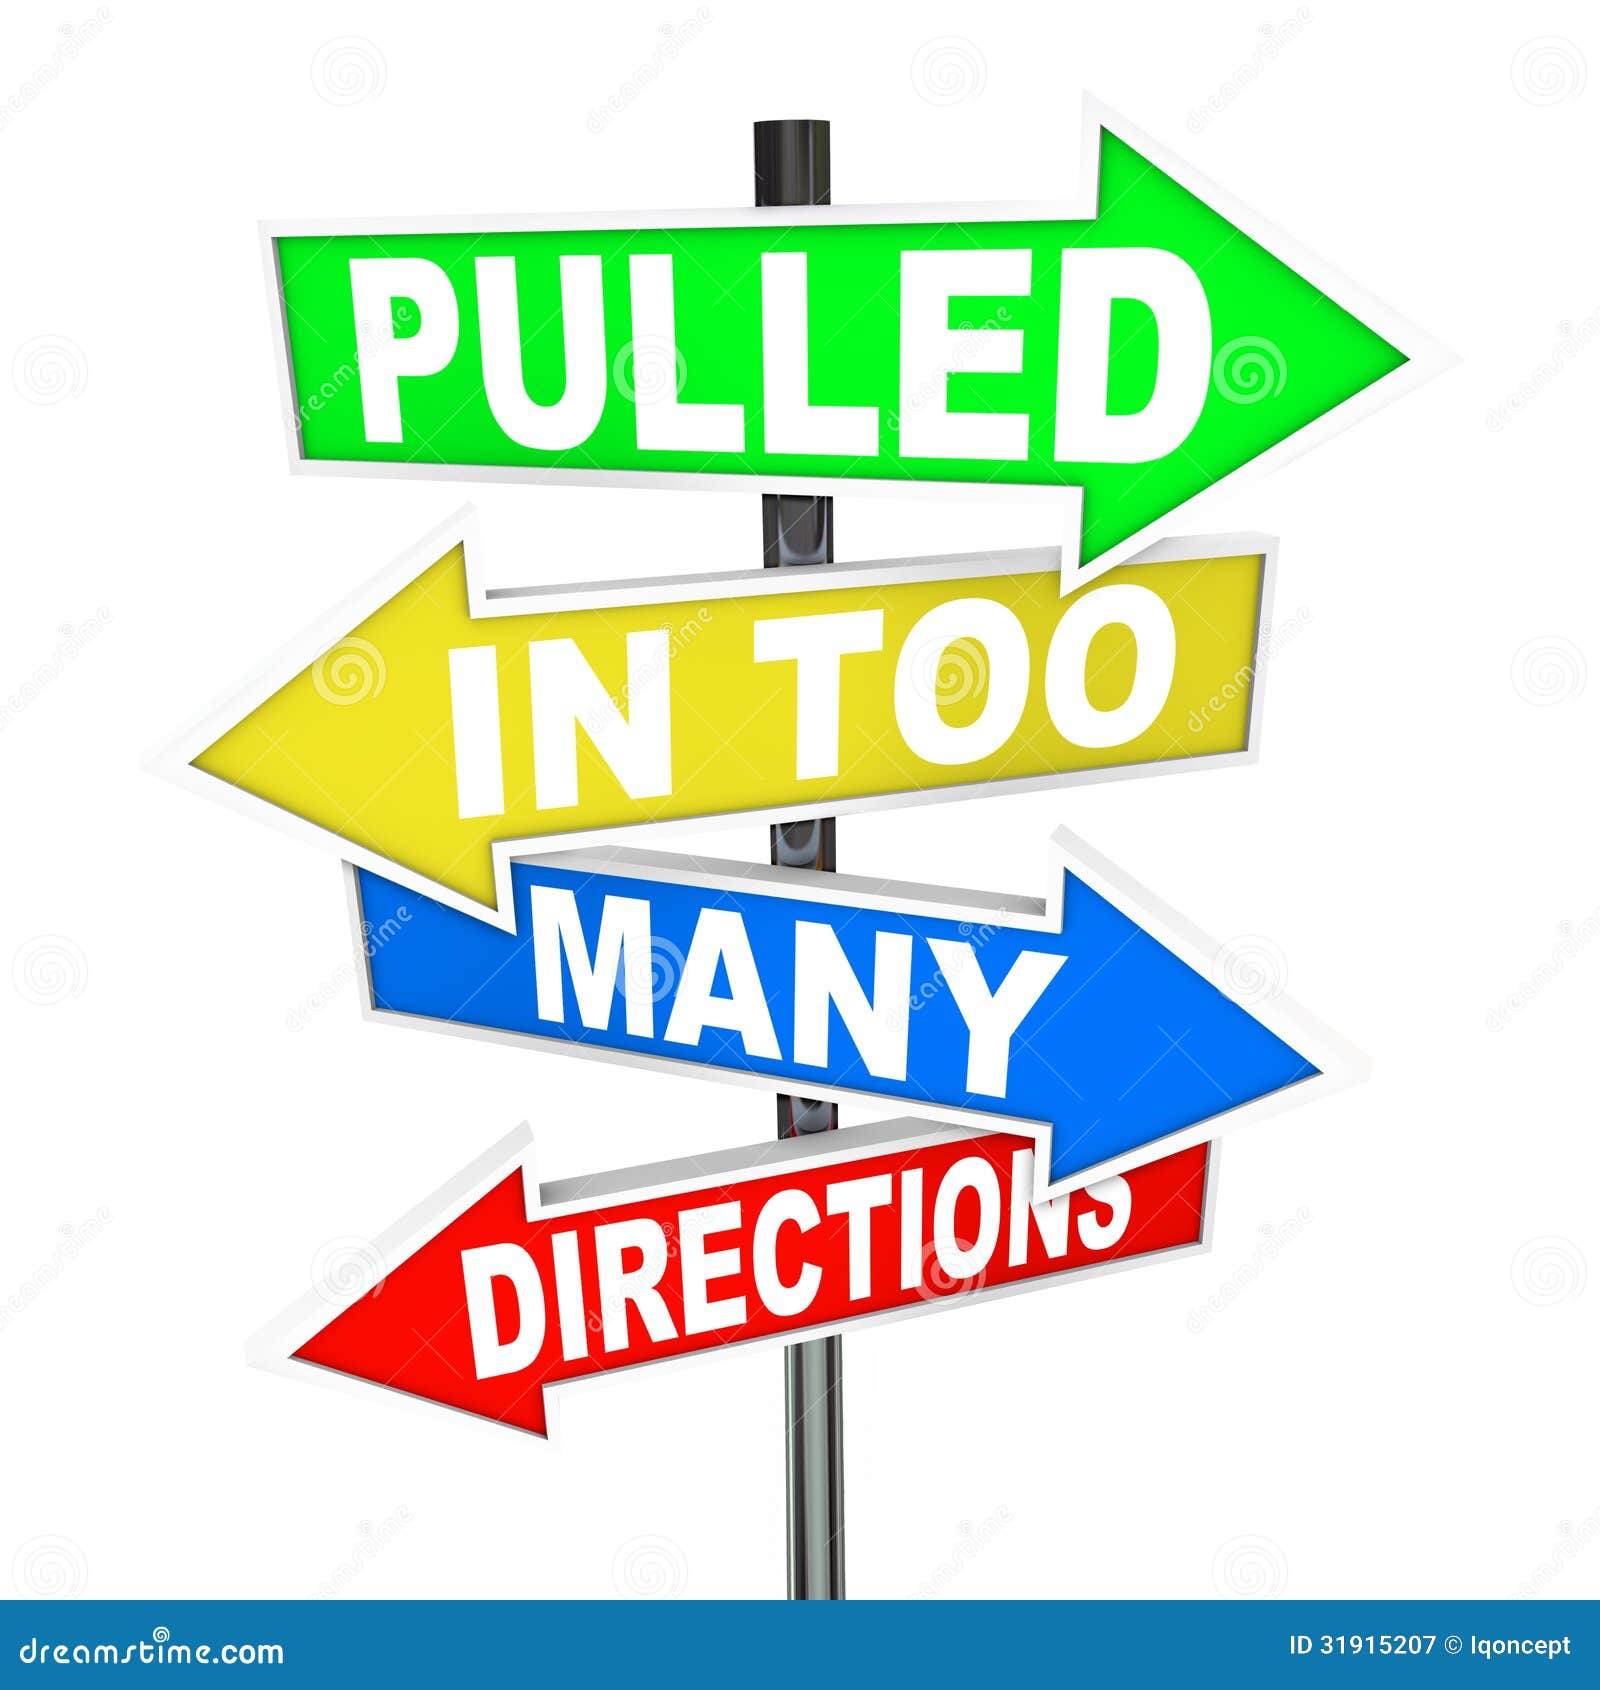 pulled in too many directions signs stress anxiety